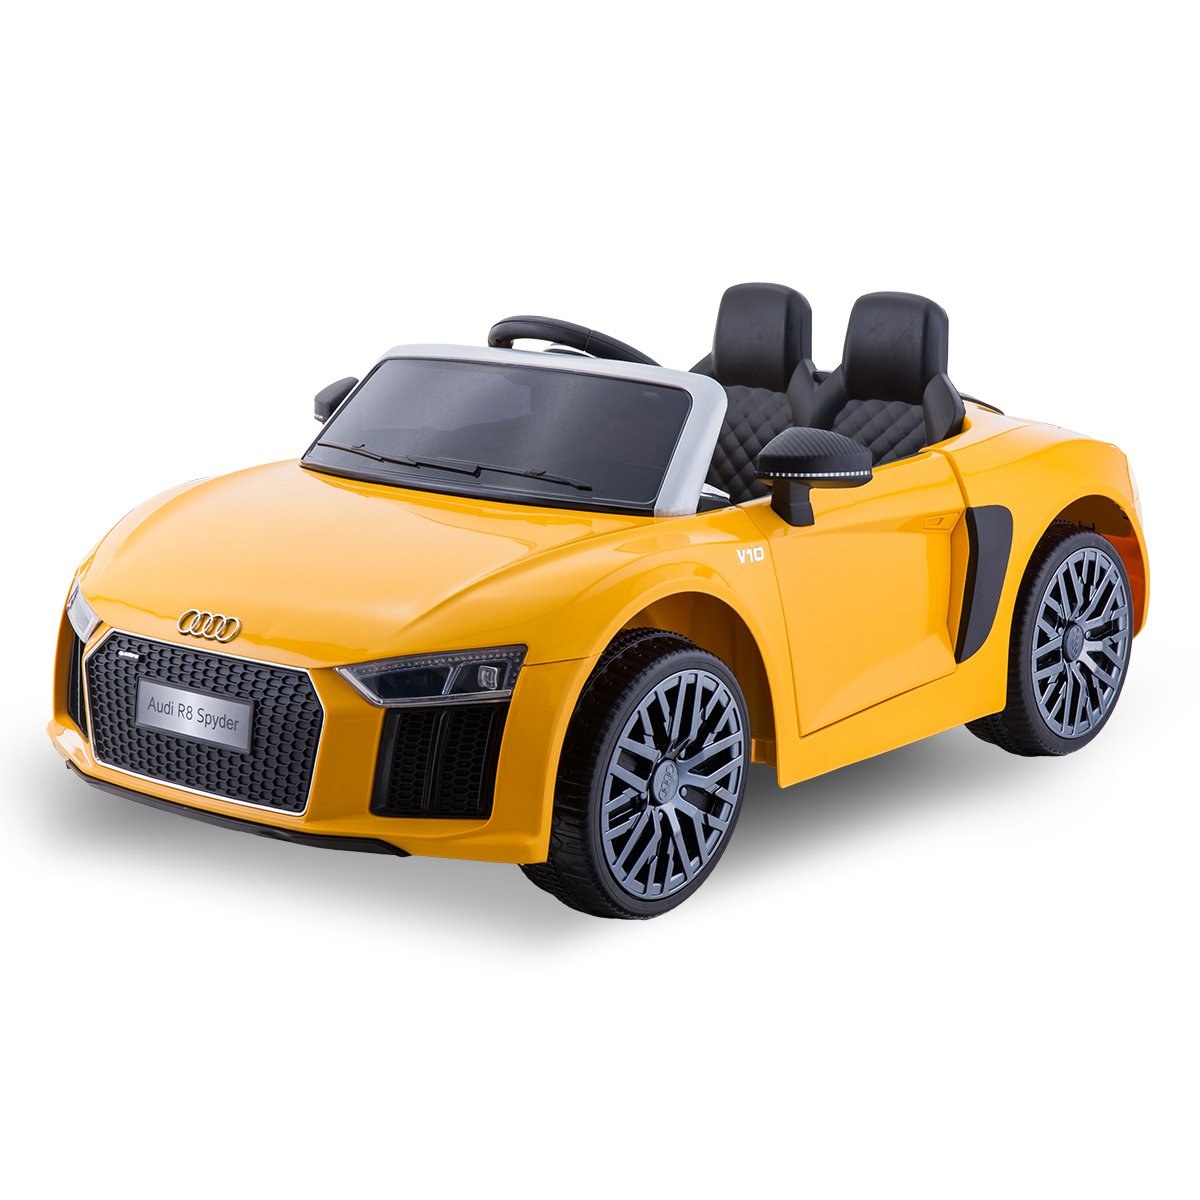 R8 Spyder Audi Licensed Kids Electric Ride On Car Remote Control Yellow 2